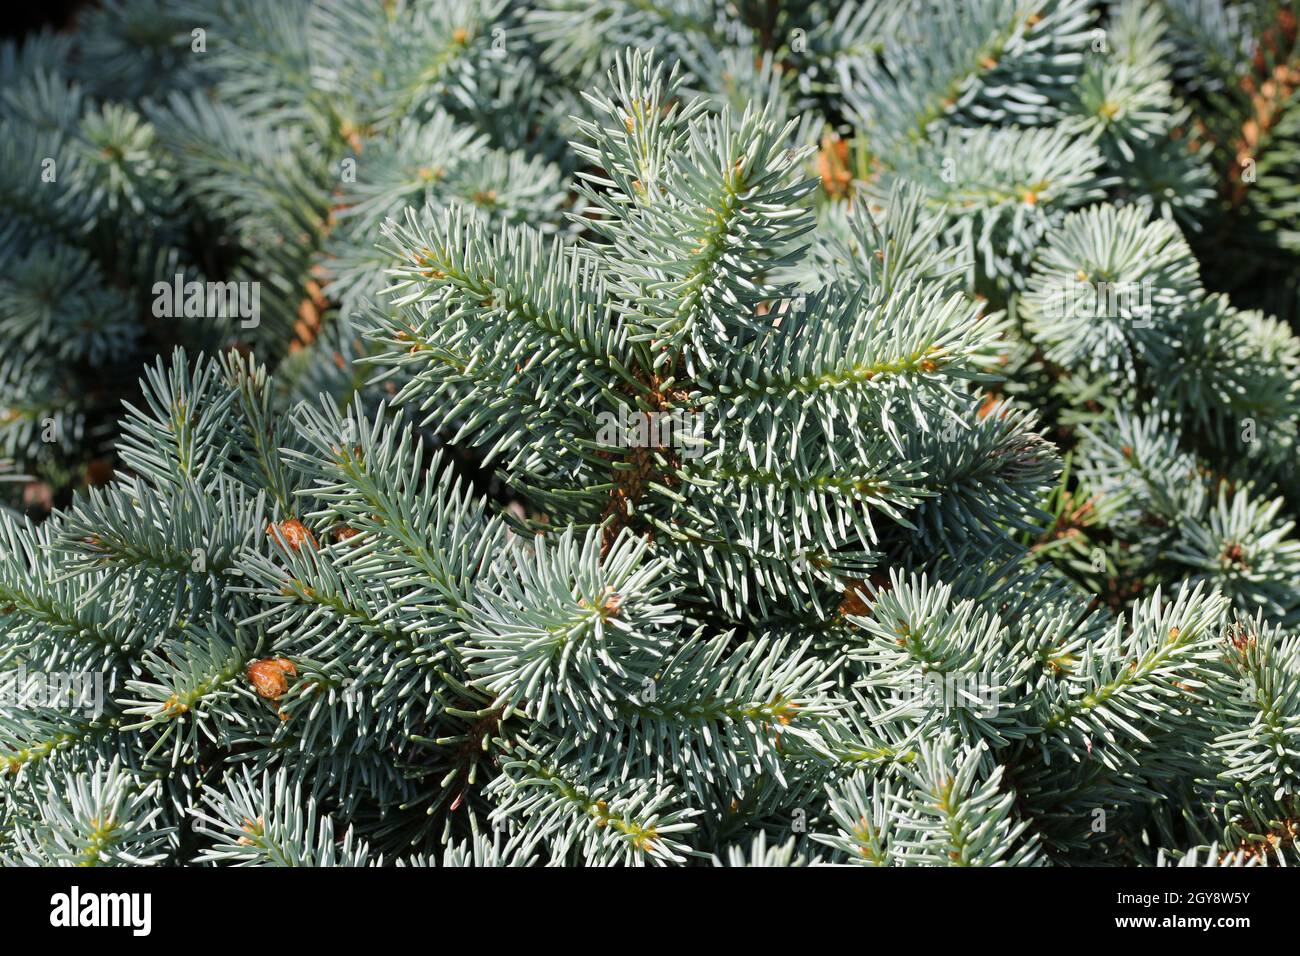 Colorado blue spruce tree, Picea pungens variety Gloria, leaves in bright sunlight with no background and blurred leaves around the edges. Stock Photo